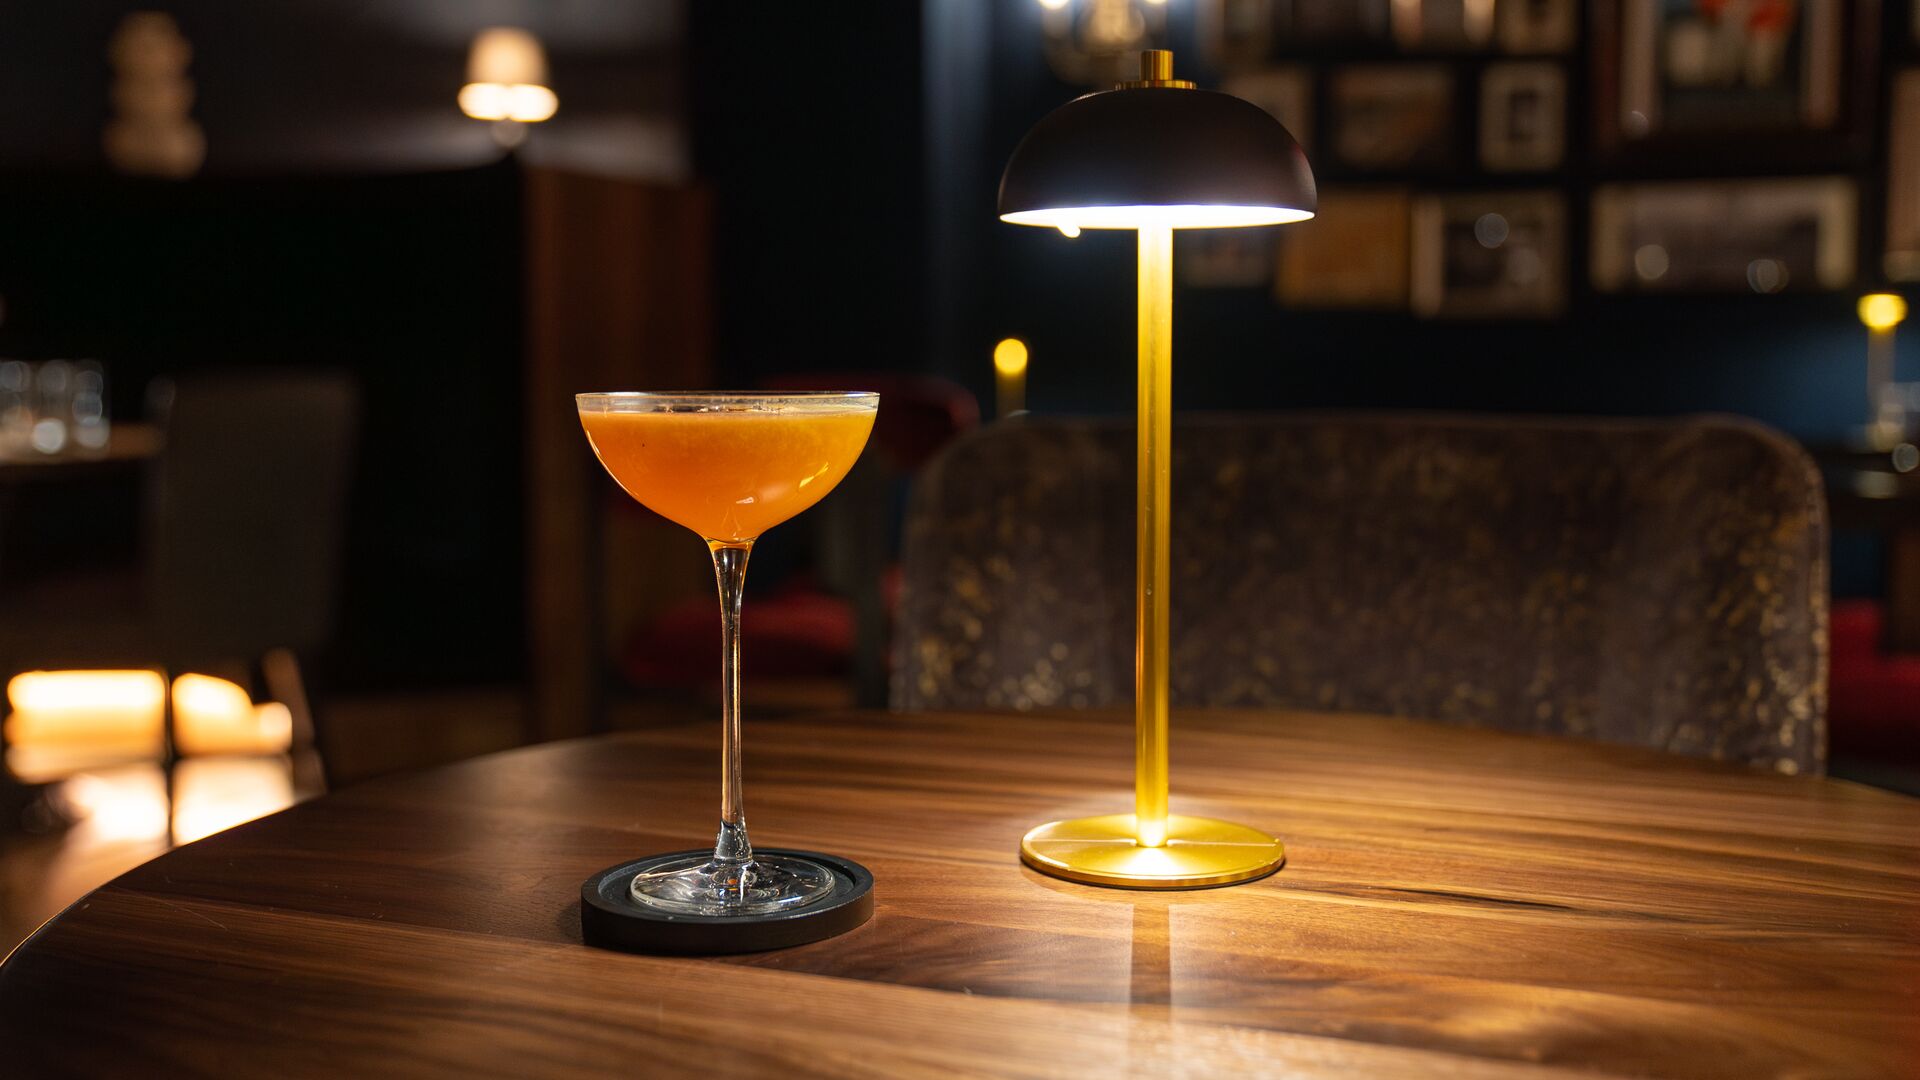 An orange-hued cocktail sits beneath a table lamp.